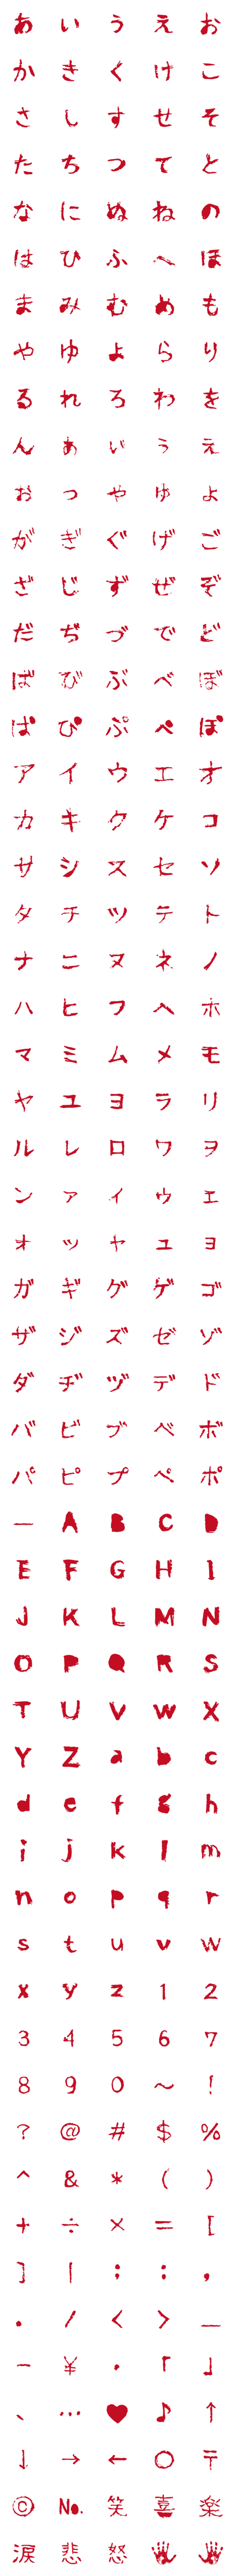 [LINE絵文字]怖いデコ文字1【血文字風】の画像一覧